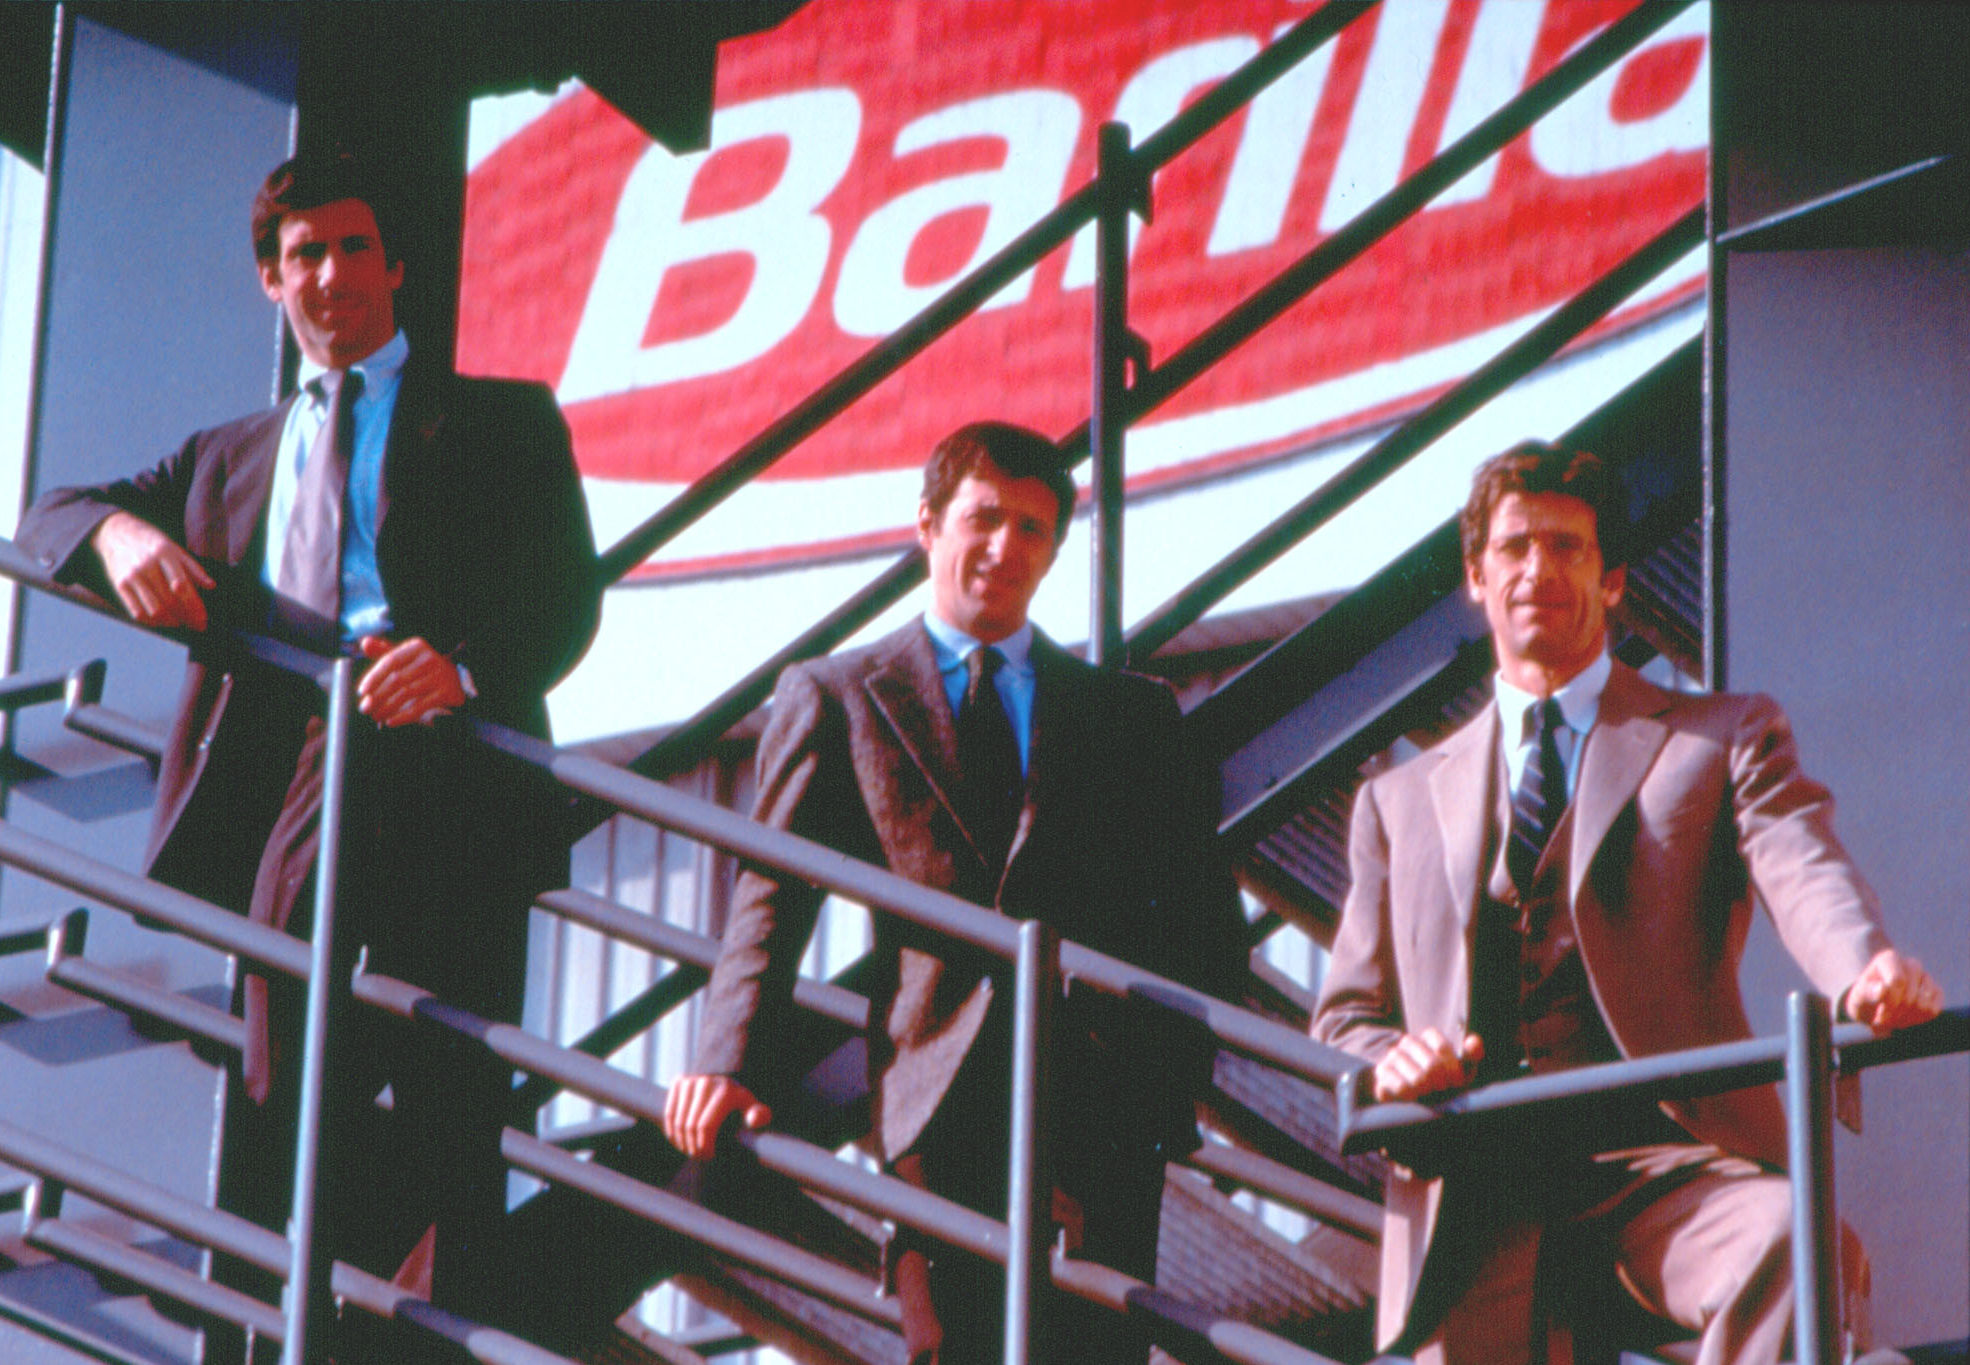 1993 - Guido, Luca and Paolo Barilla take Pietro's place at the leadership of the Company